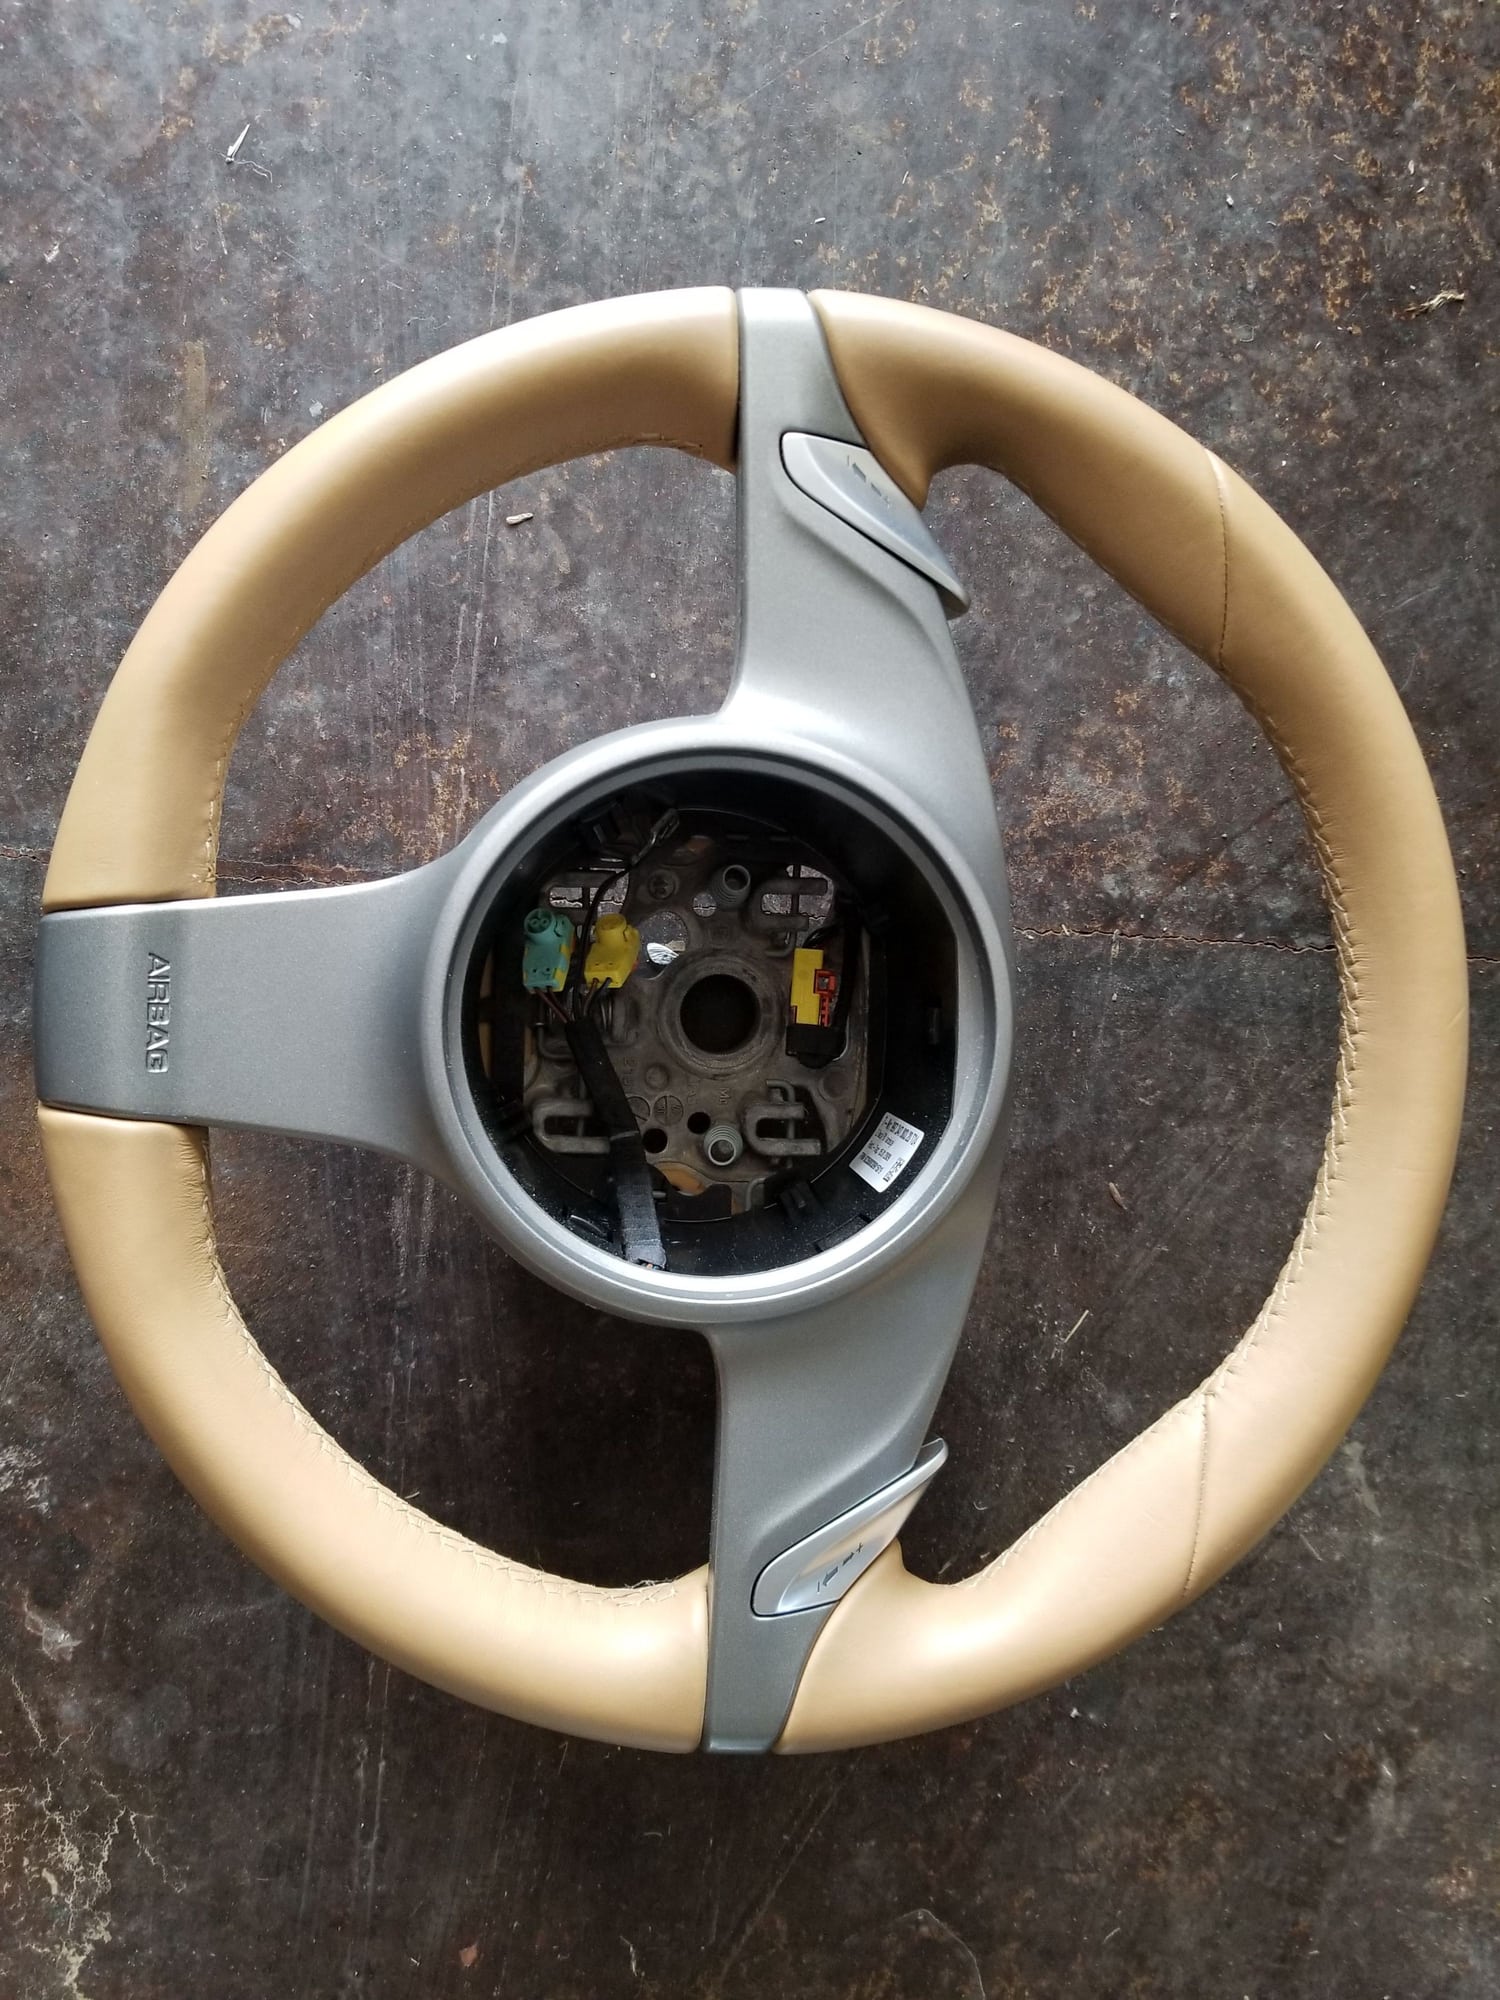 Interior/Upholstery - 997.2 Sand Beige/Tan PDK Steering Wheel - Used - 2009 to 2012 Porsche 911 - Jackson, TN 38305, United States